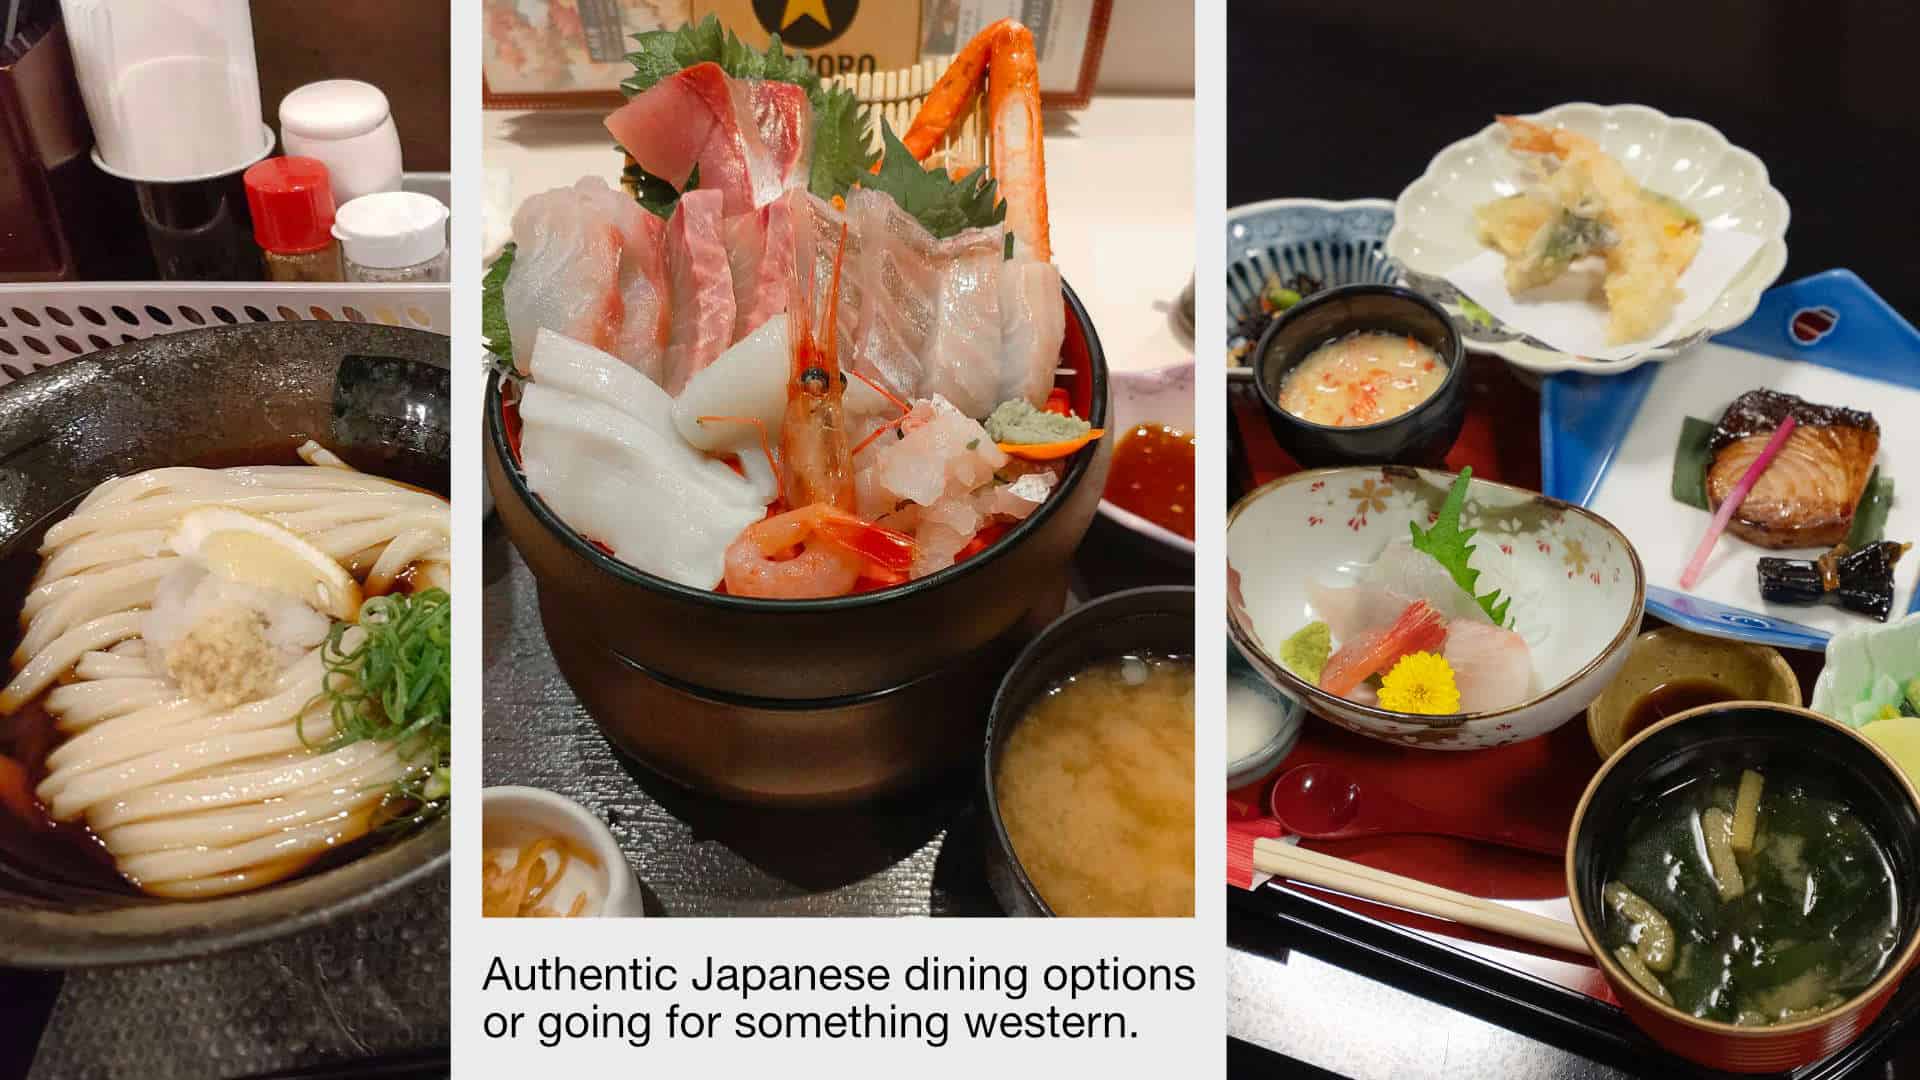 dining options in Joetsu. Noodles, sea food and traditional Japanese kaiseki course dining.